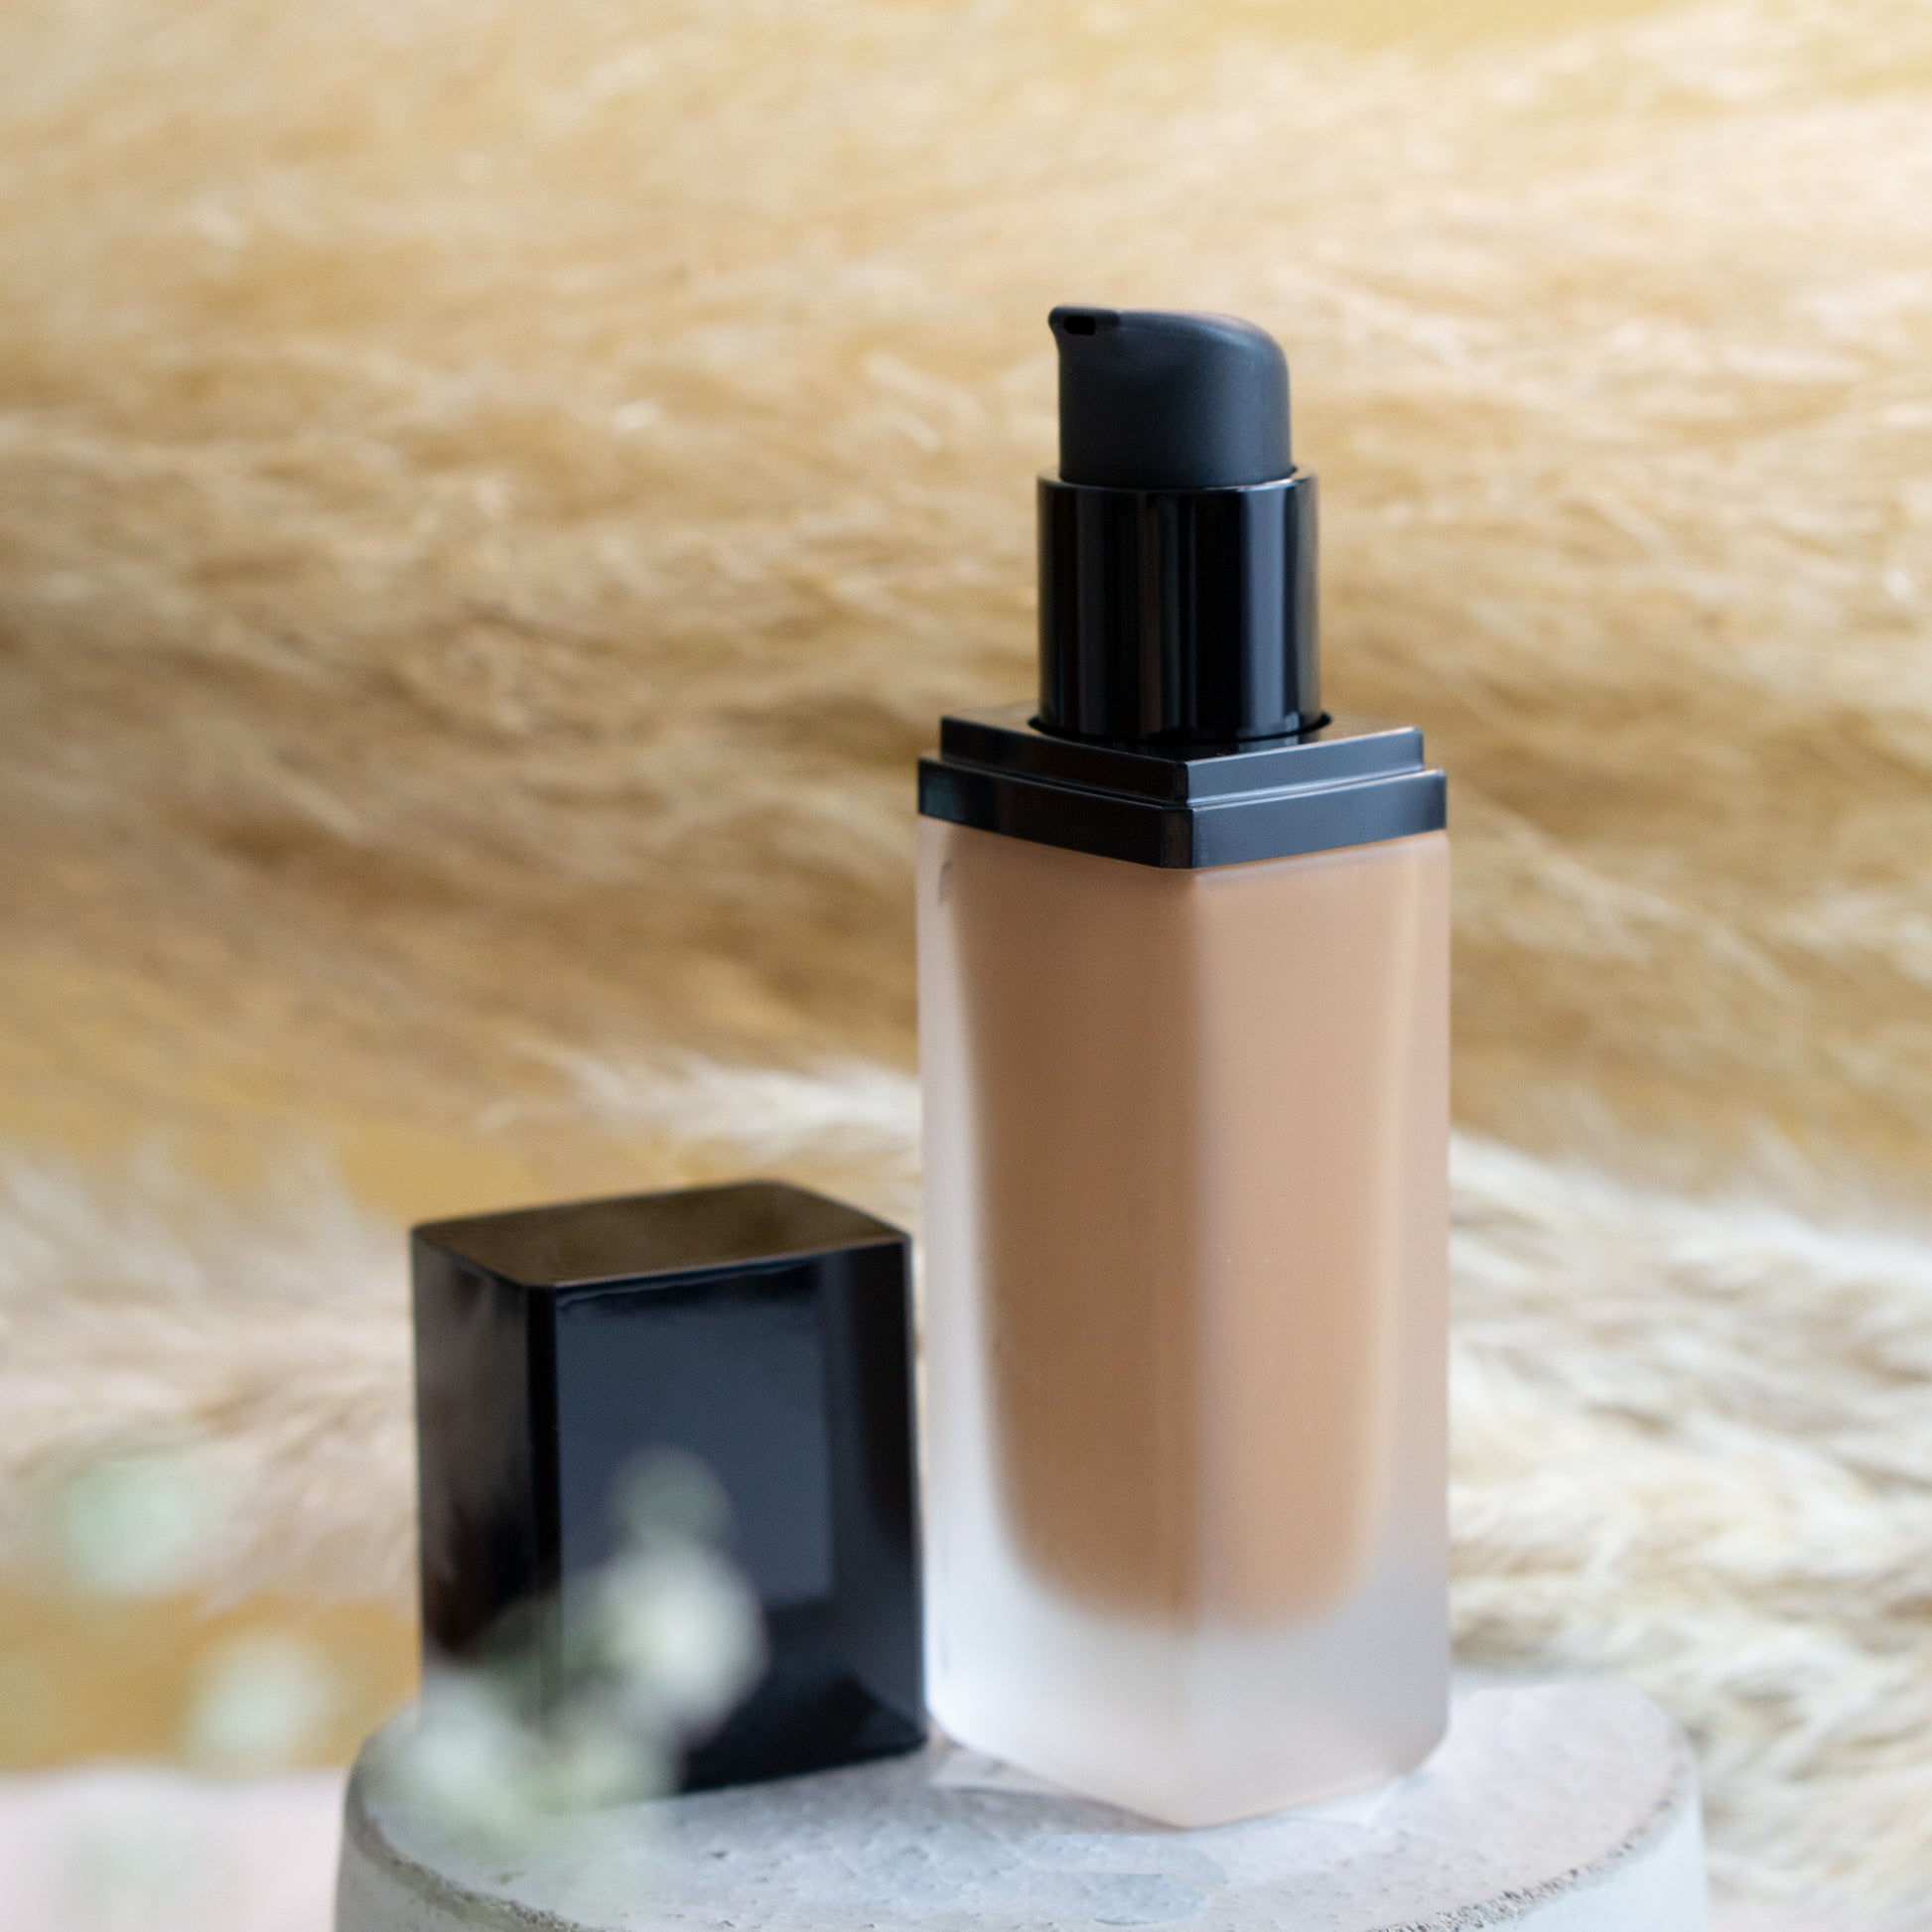 2. Foundation With Spf bottle against a white backdrop.